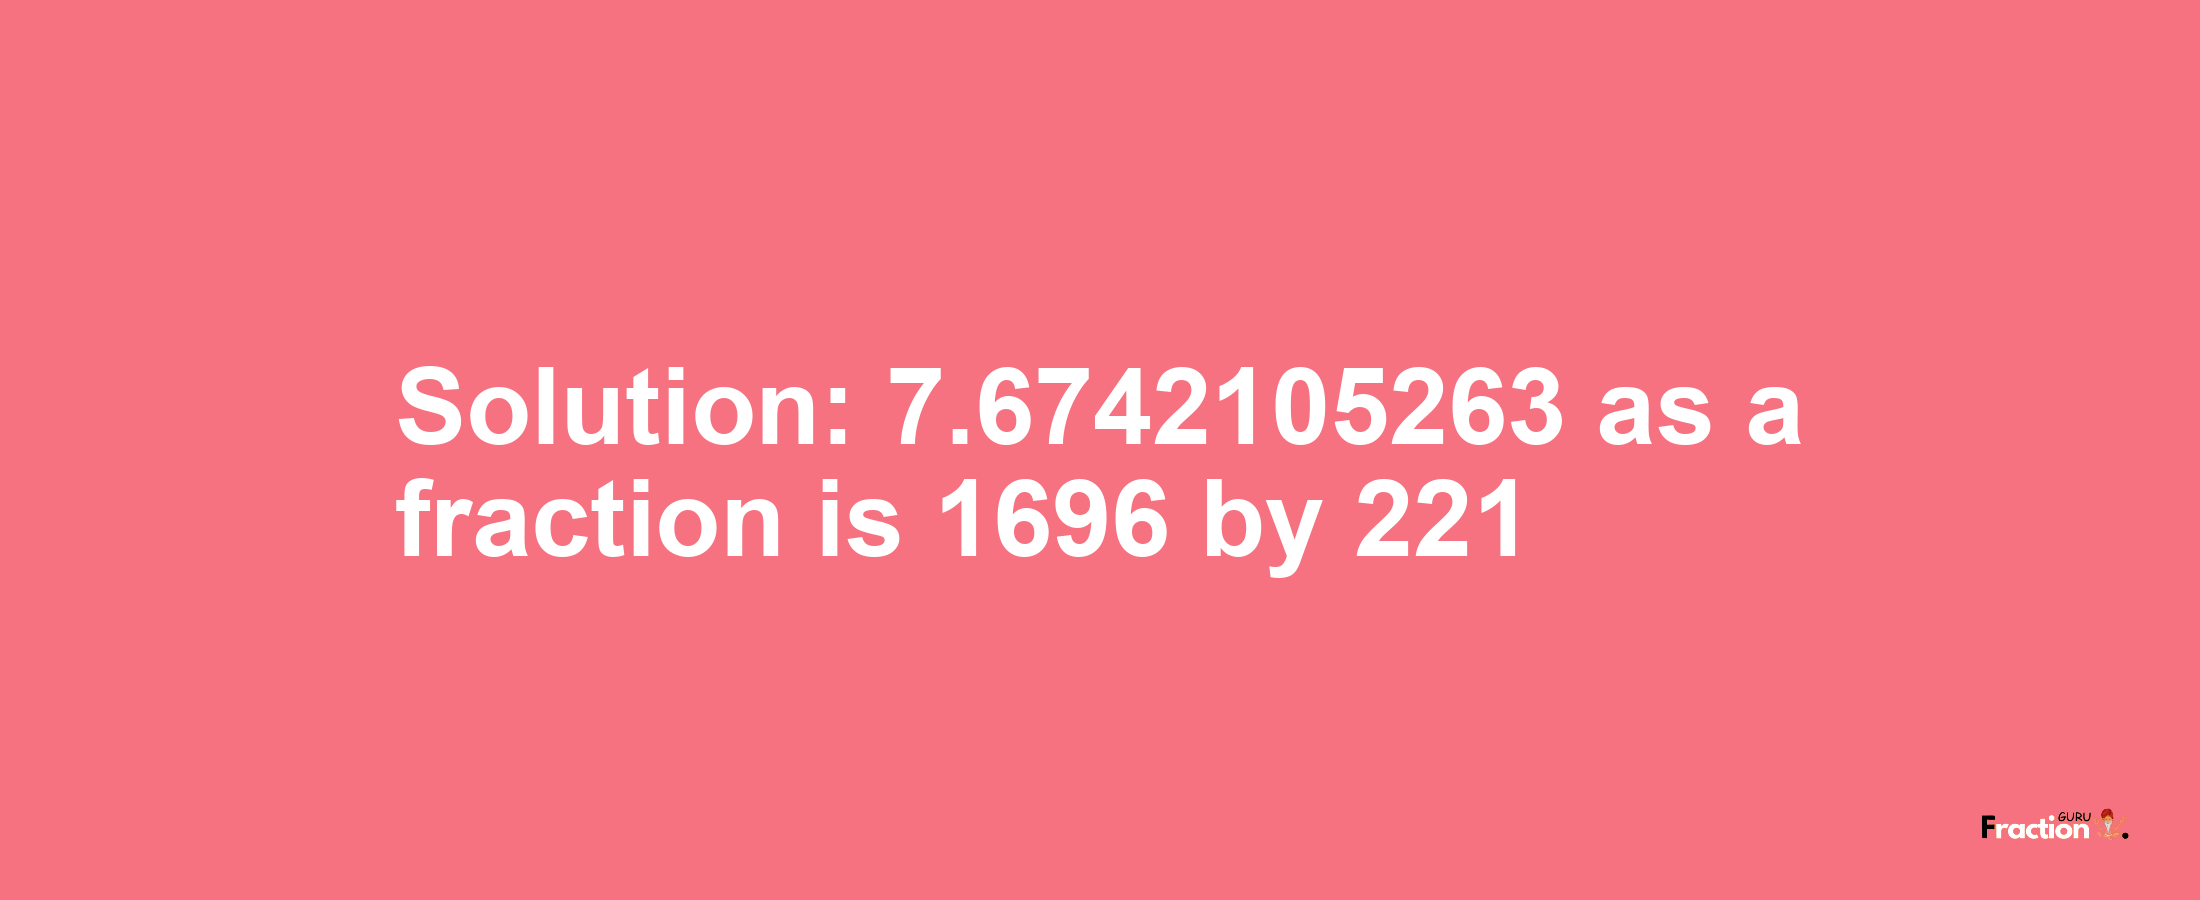 Solution:7.6742105263 as a fraction is 1696/221